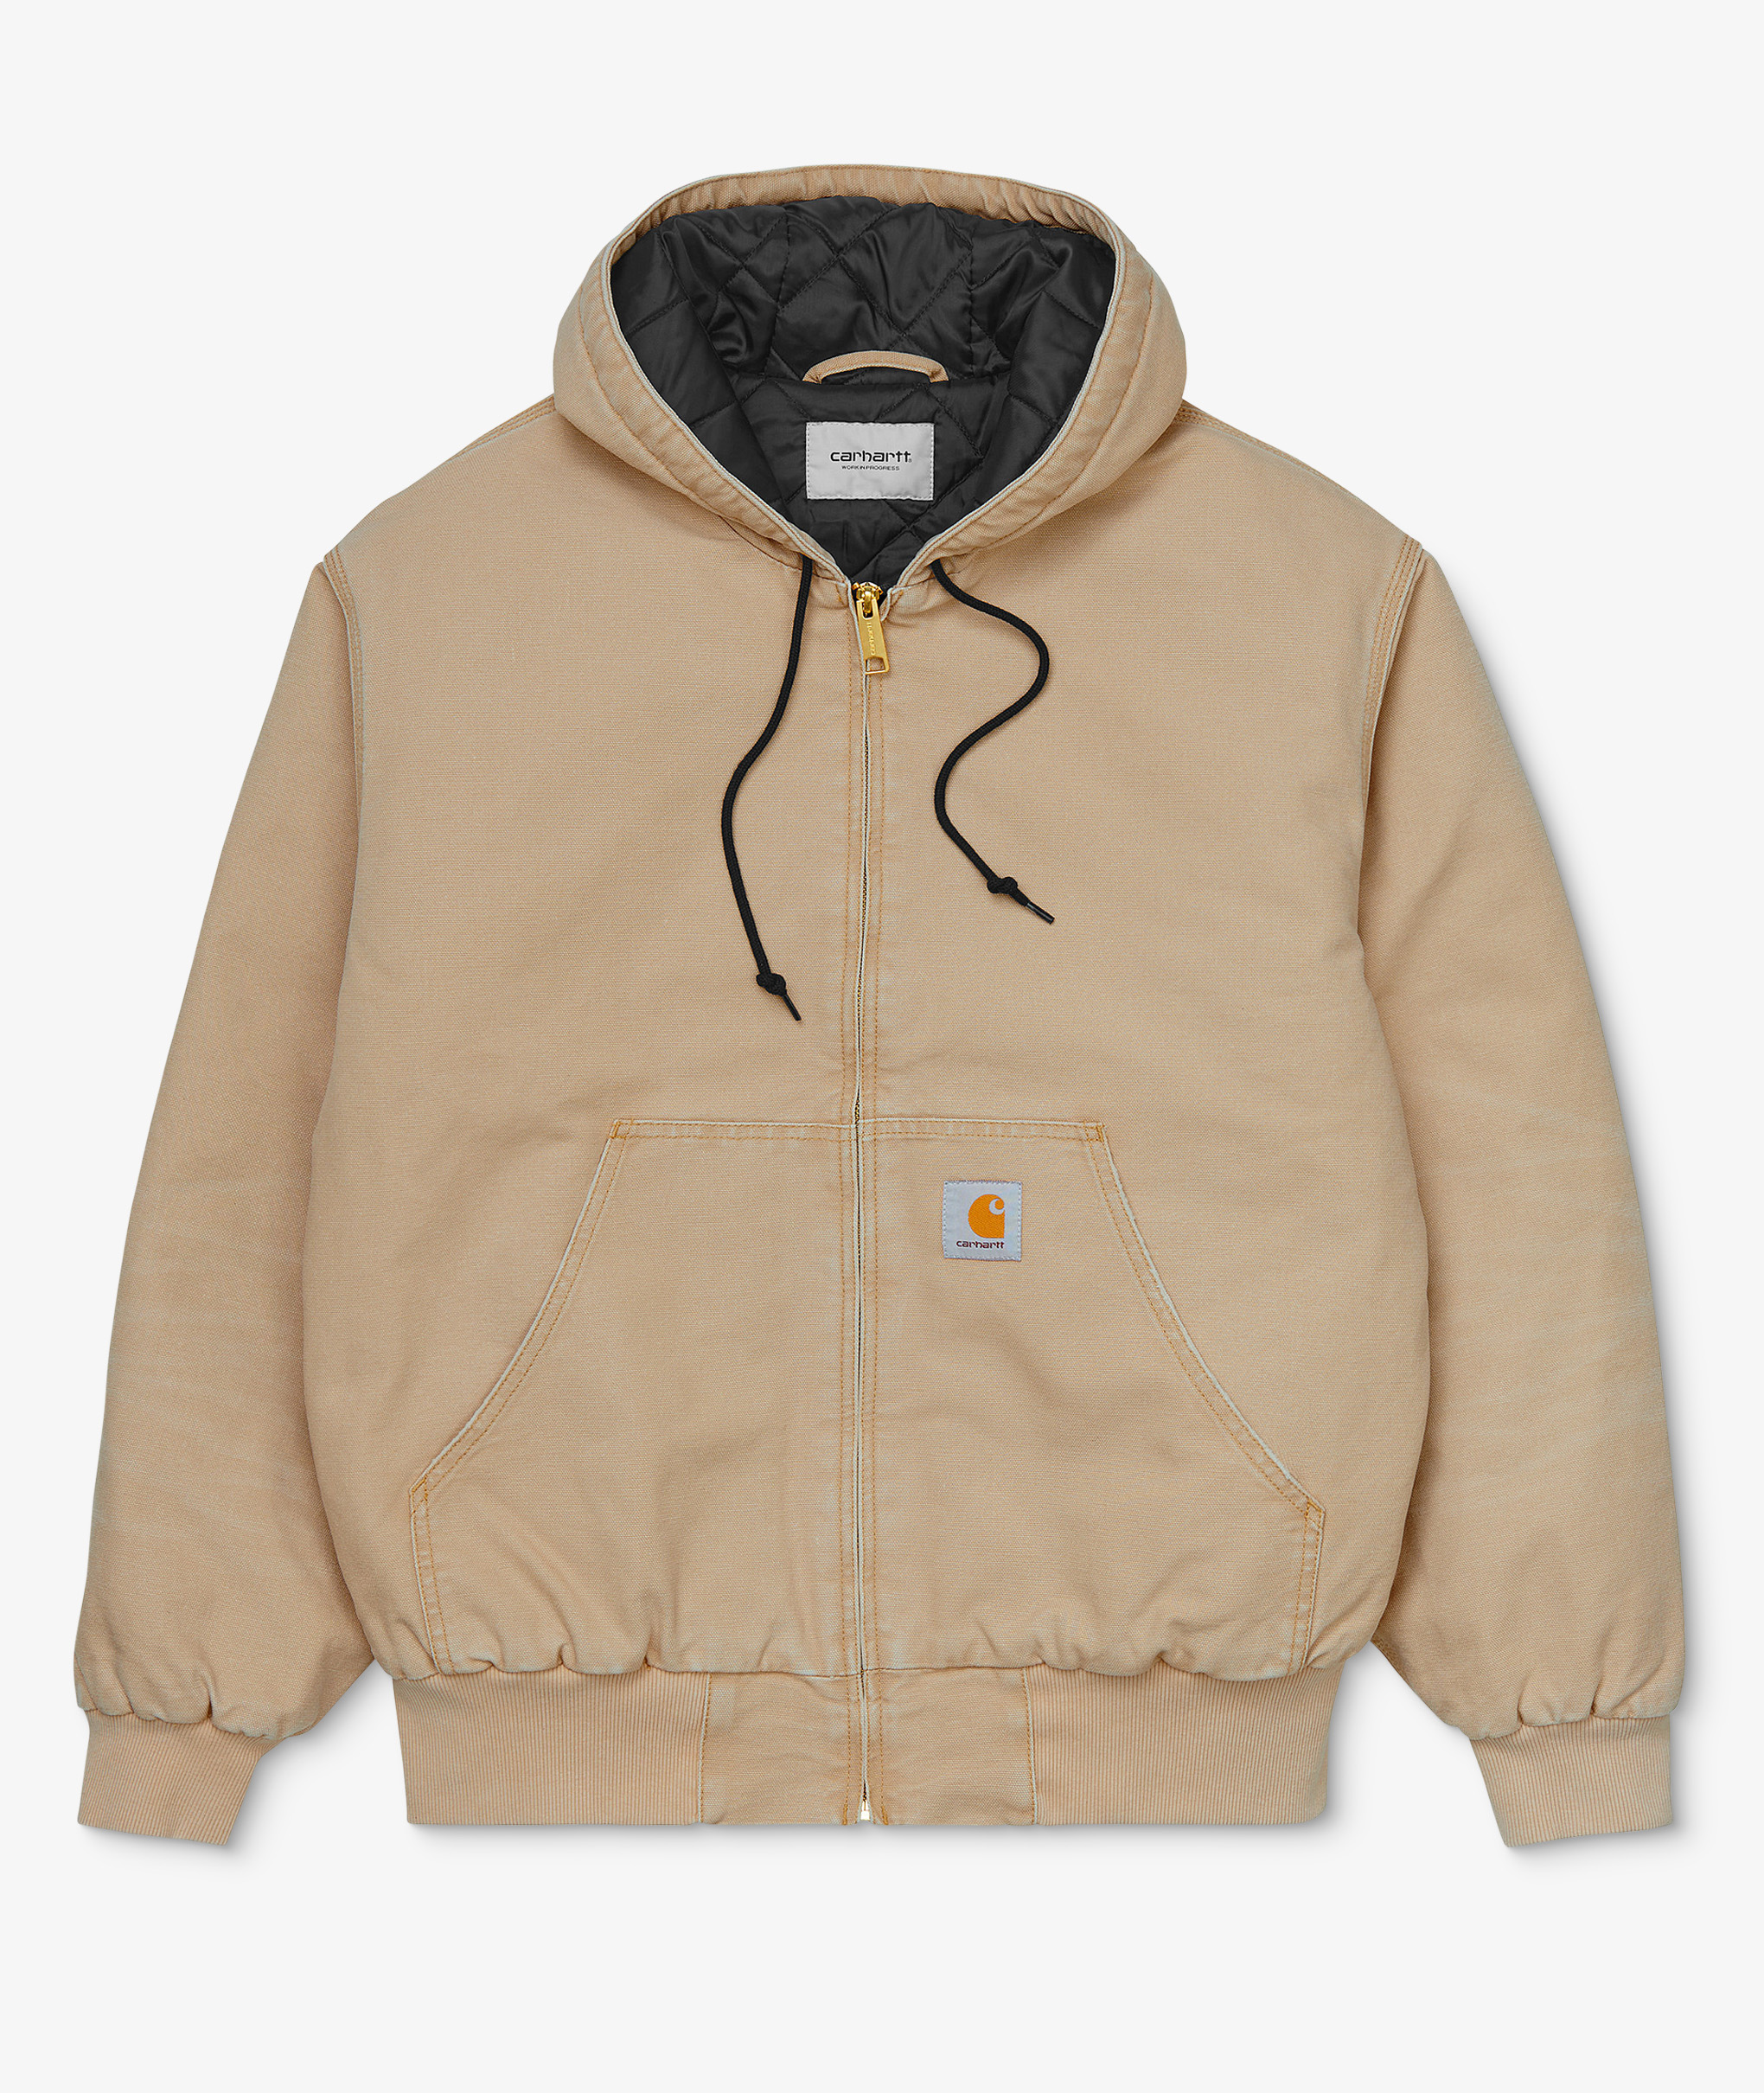 Norse Store | Shipping Worldwide - Carhartt WIP OG Active Jacket